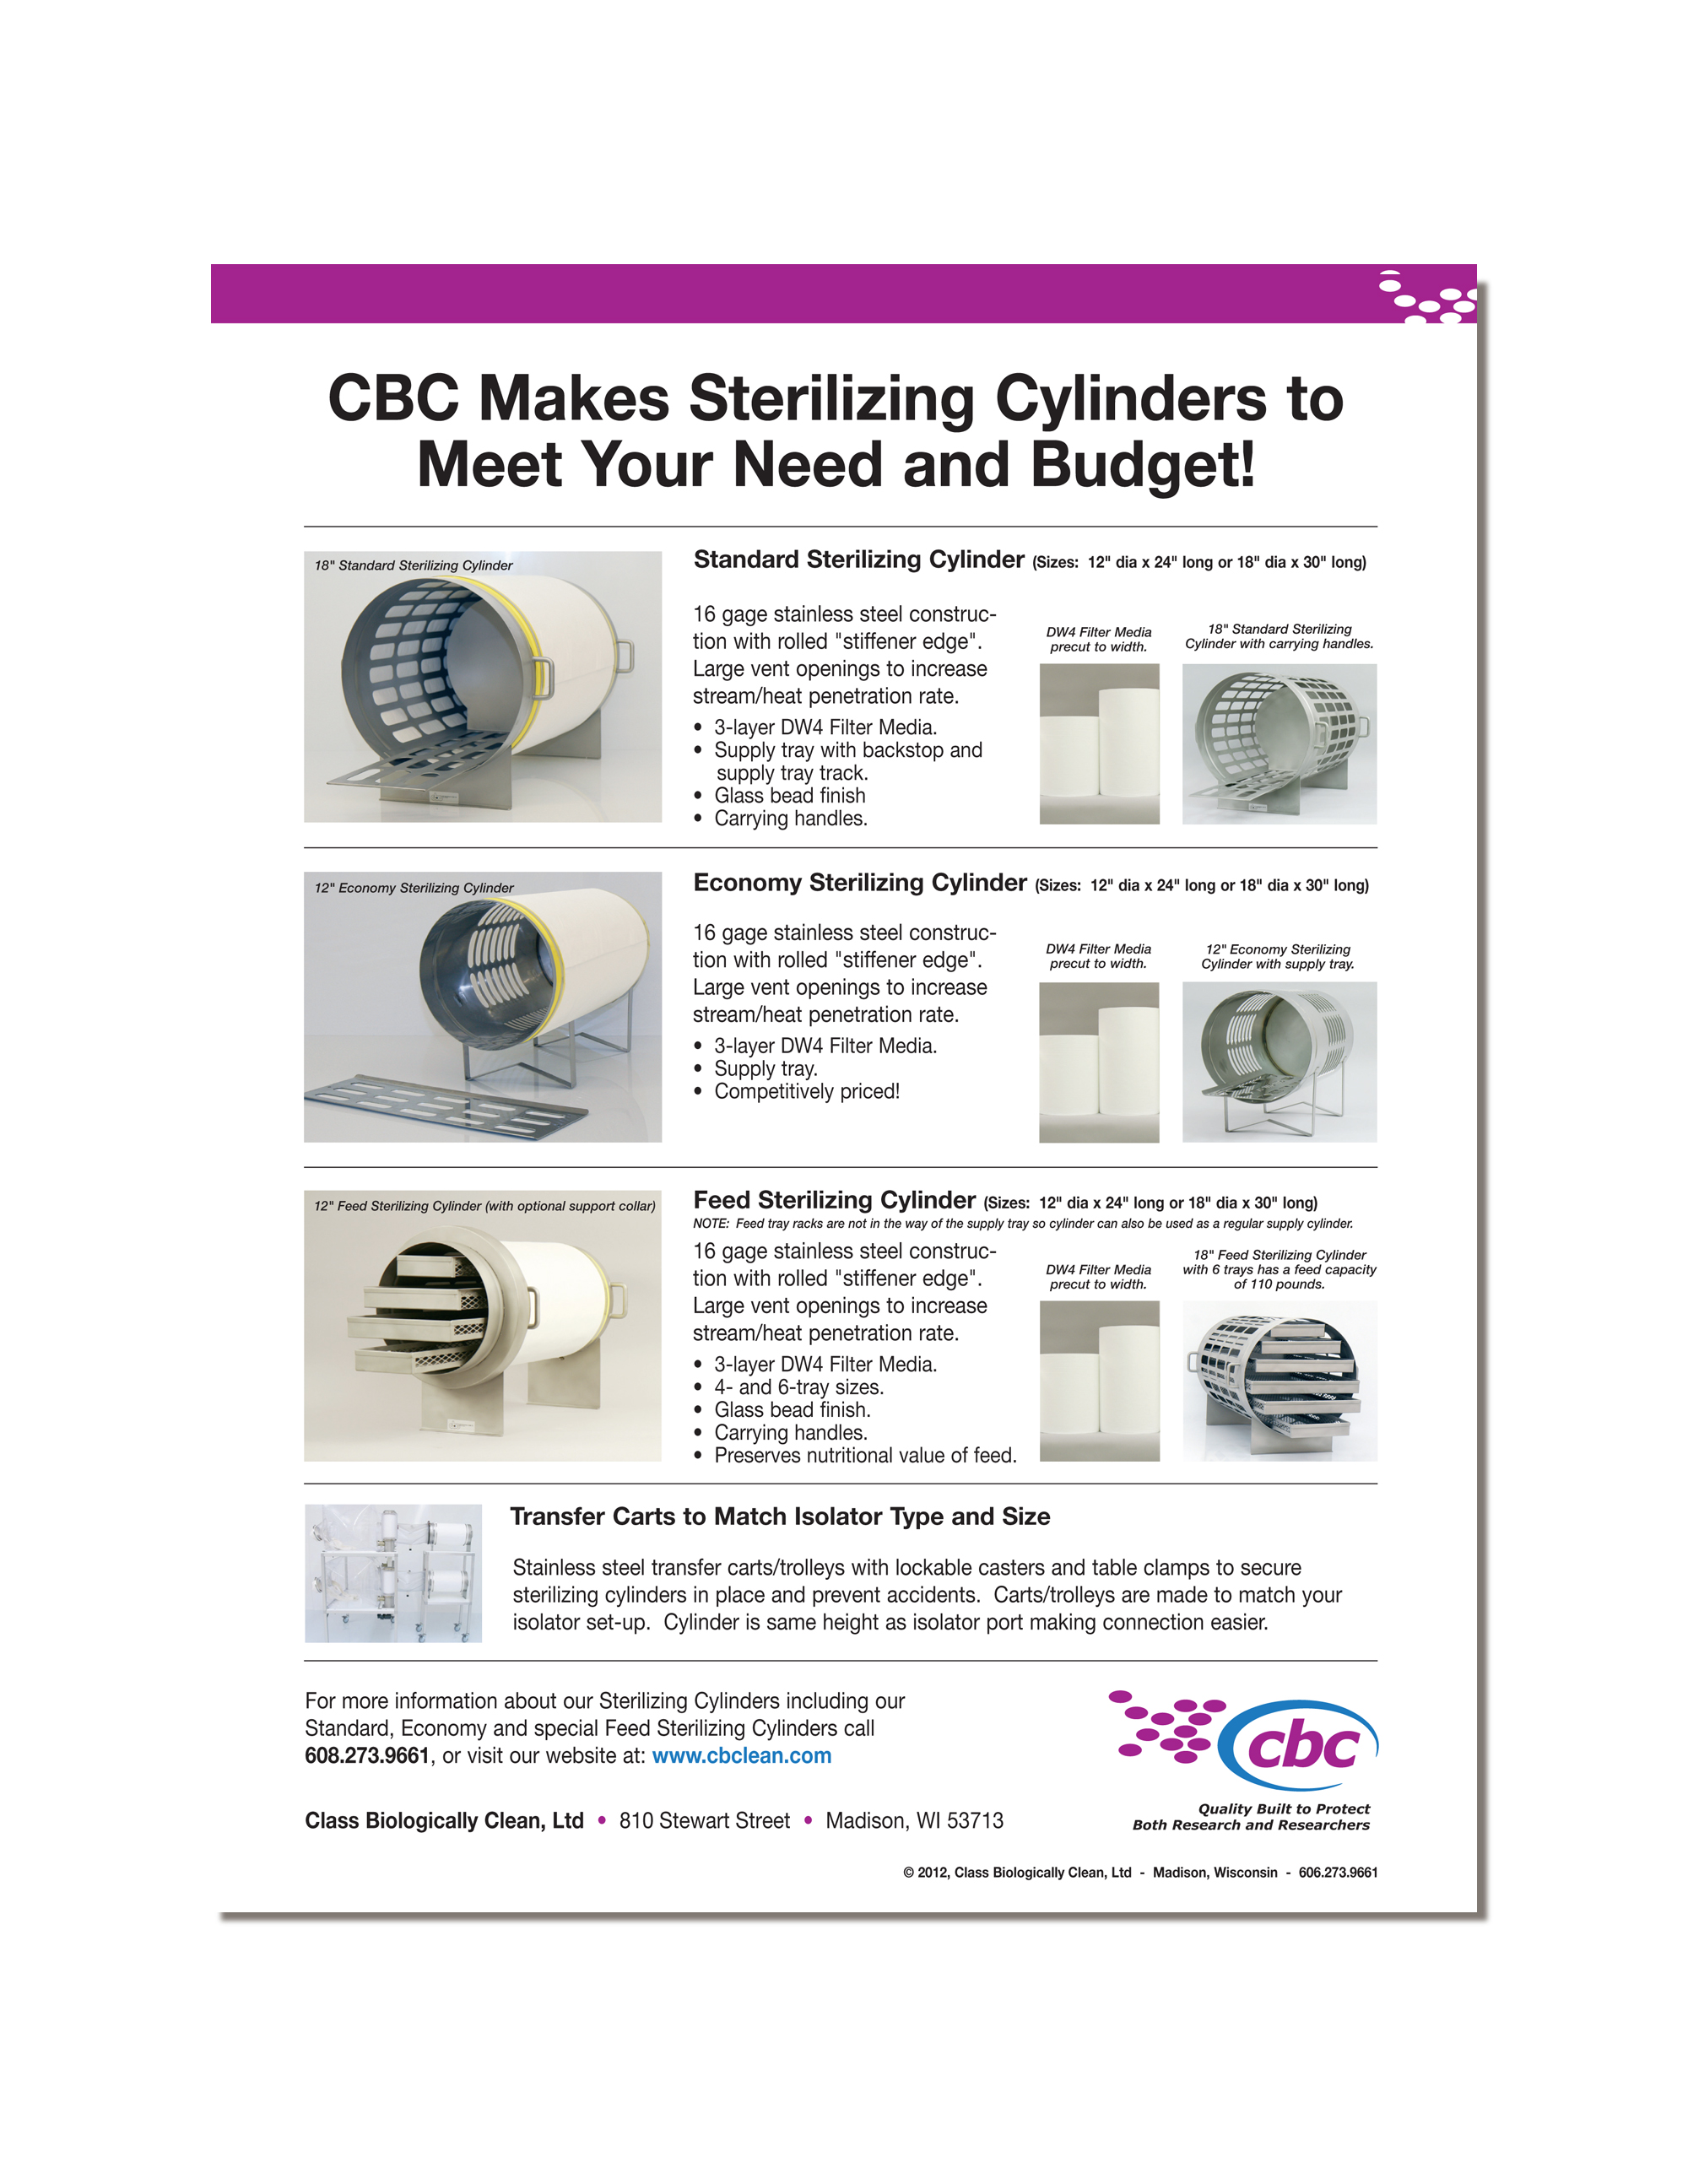 Download a printable flyer about CBC's Sterilizing Cylinder. Click here to download flyer.